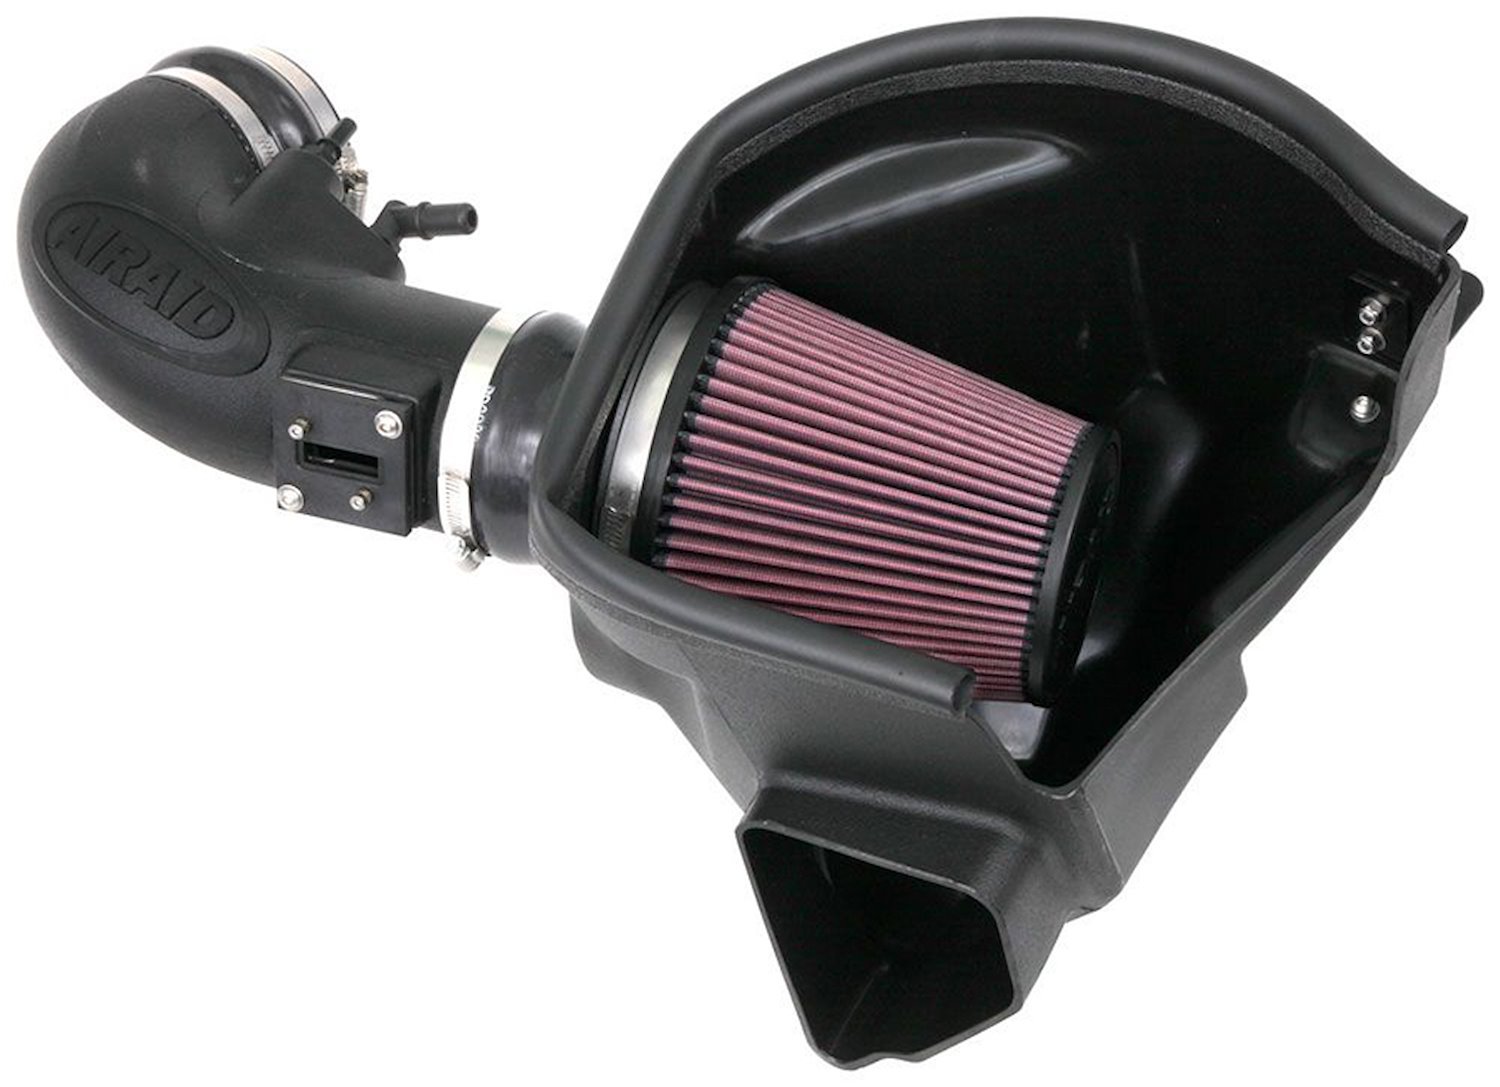 MXP Cold Air Intake System 2016-2018 Ford Mustang Shelby GT350 V8 5.2L Supercharged - Oiled Filter